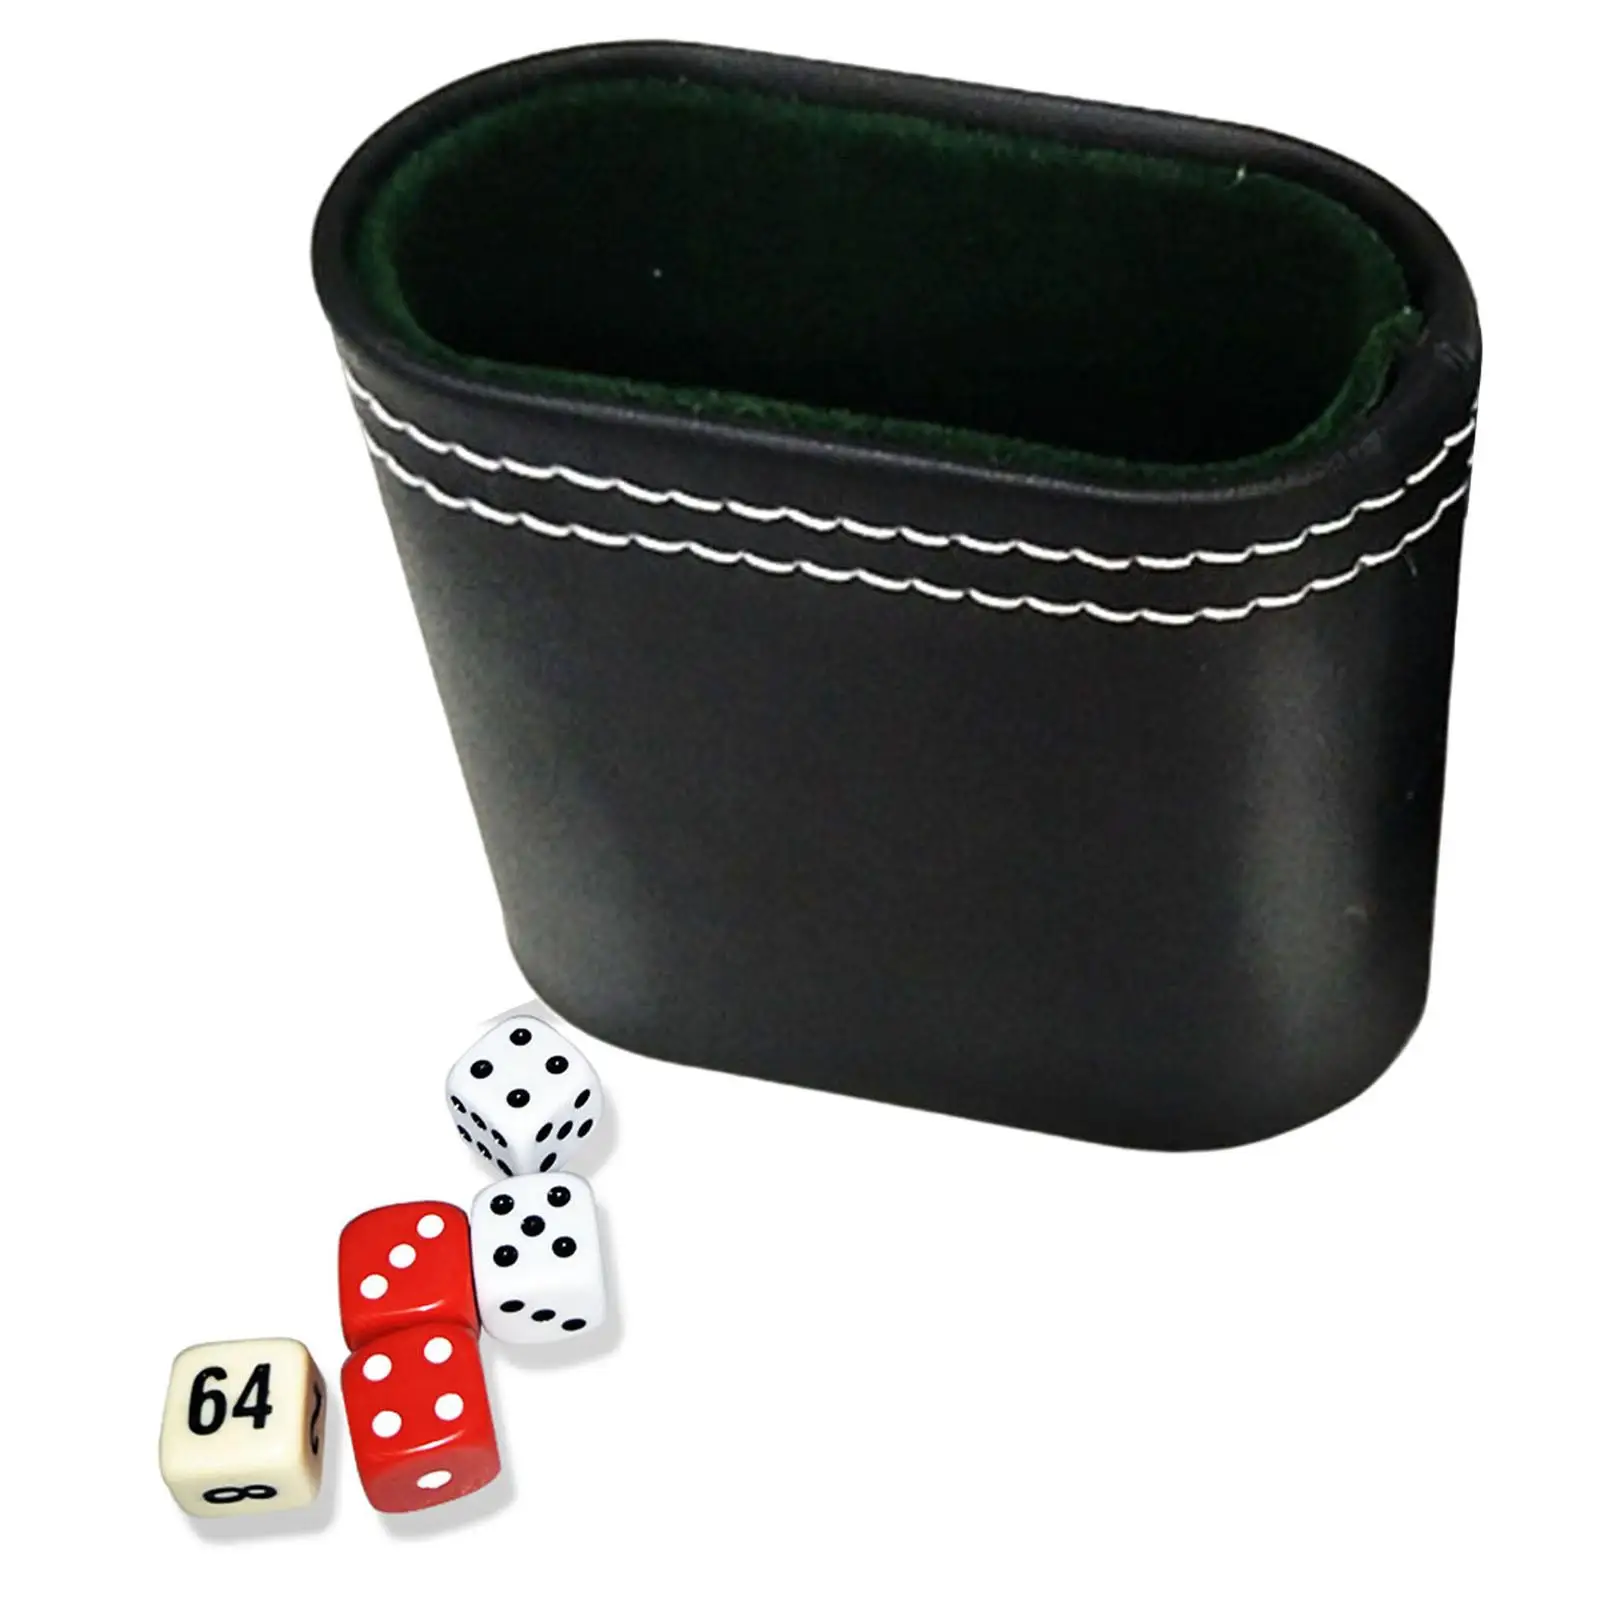 Professional Dices Cups PU Leather Manual Dices Cup Dices Box Entertainment Accessories for DND RPG Table Board Games Party Bar